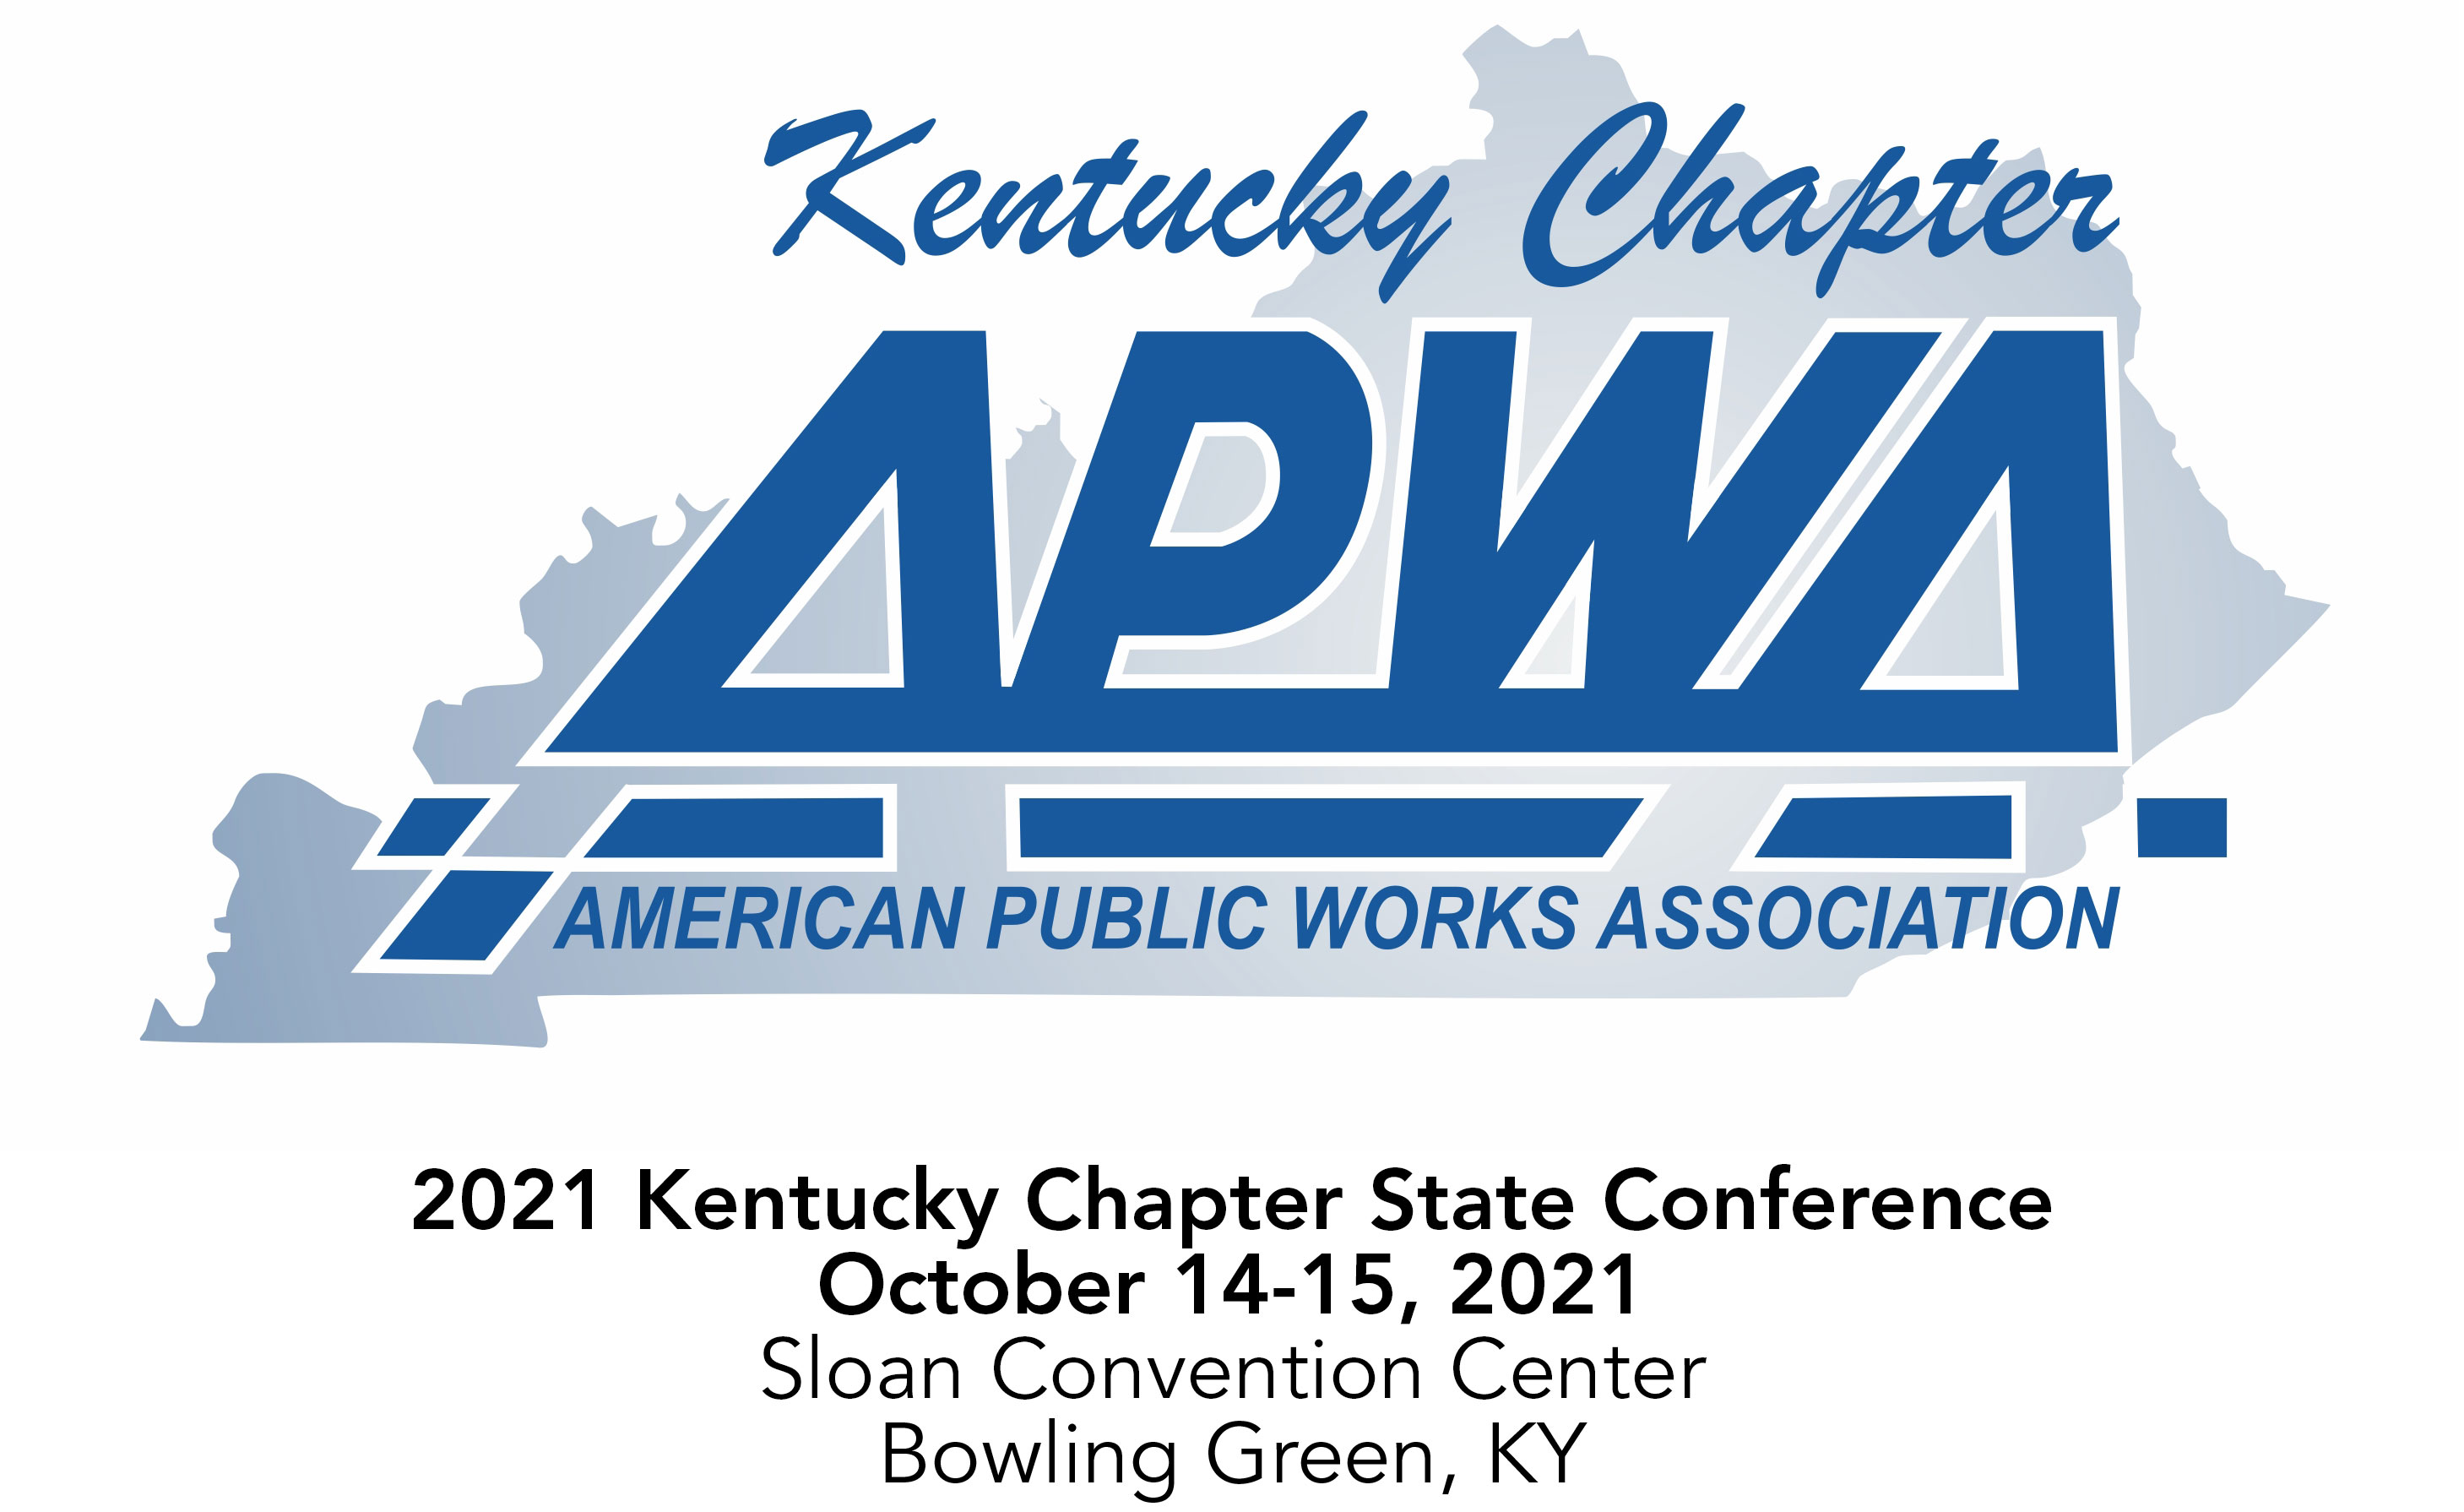 Kentucky Chapter of the American Public Works Association State Conference